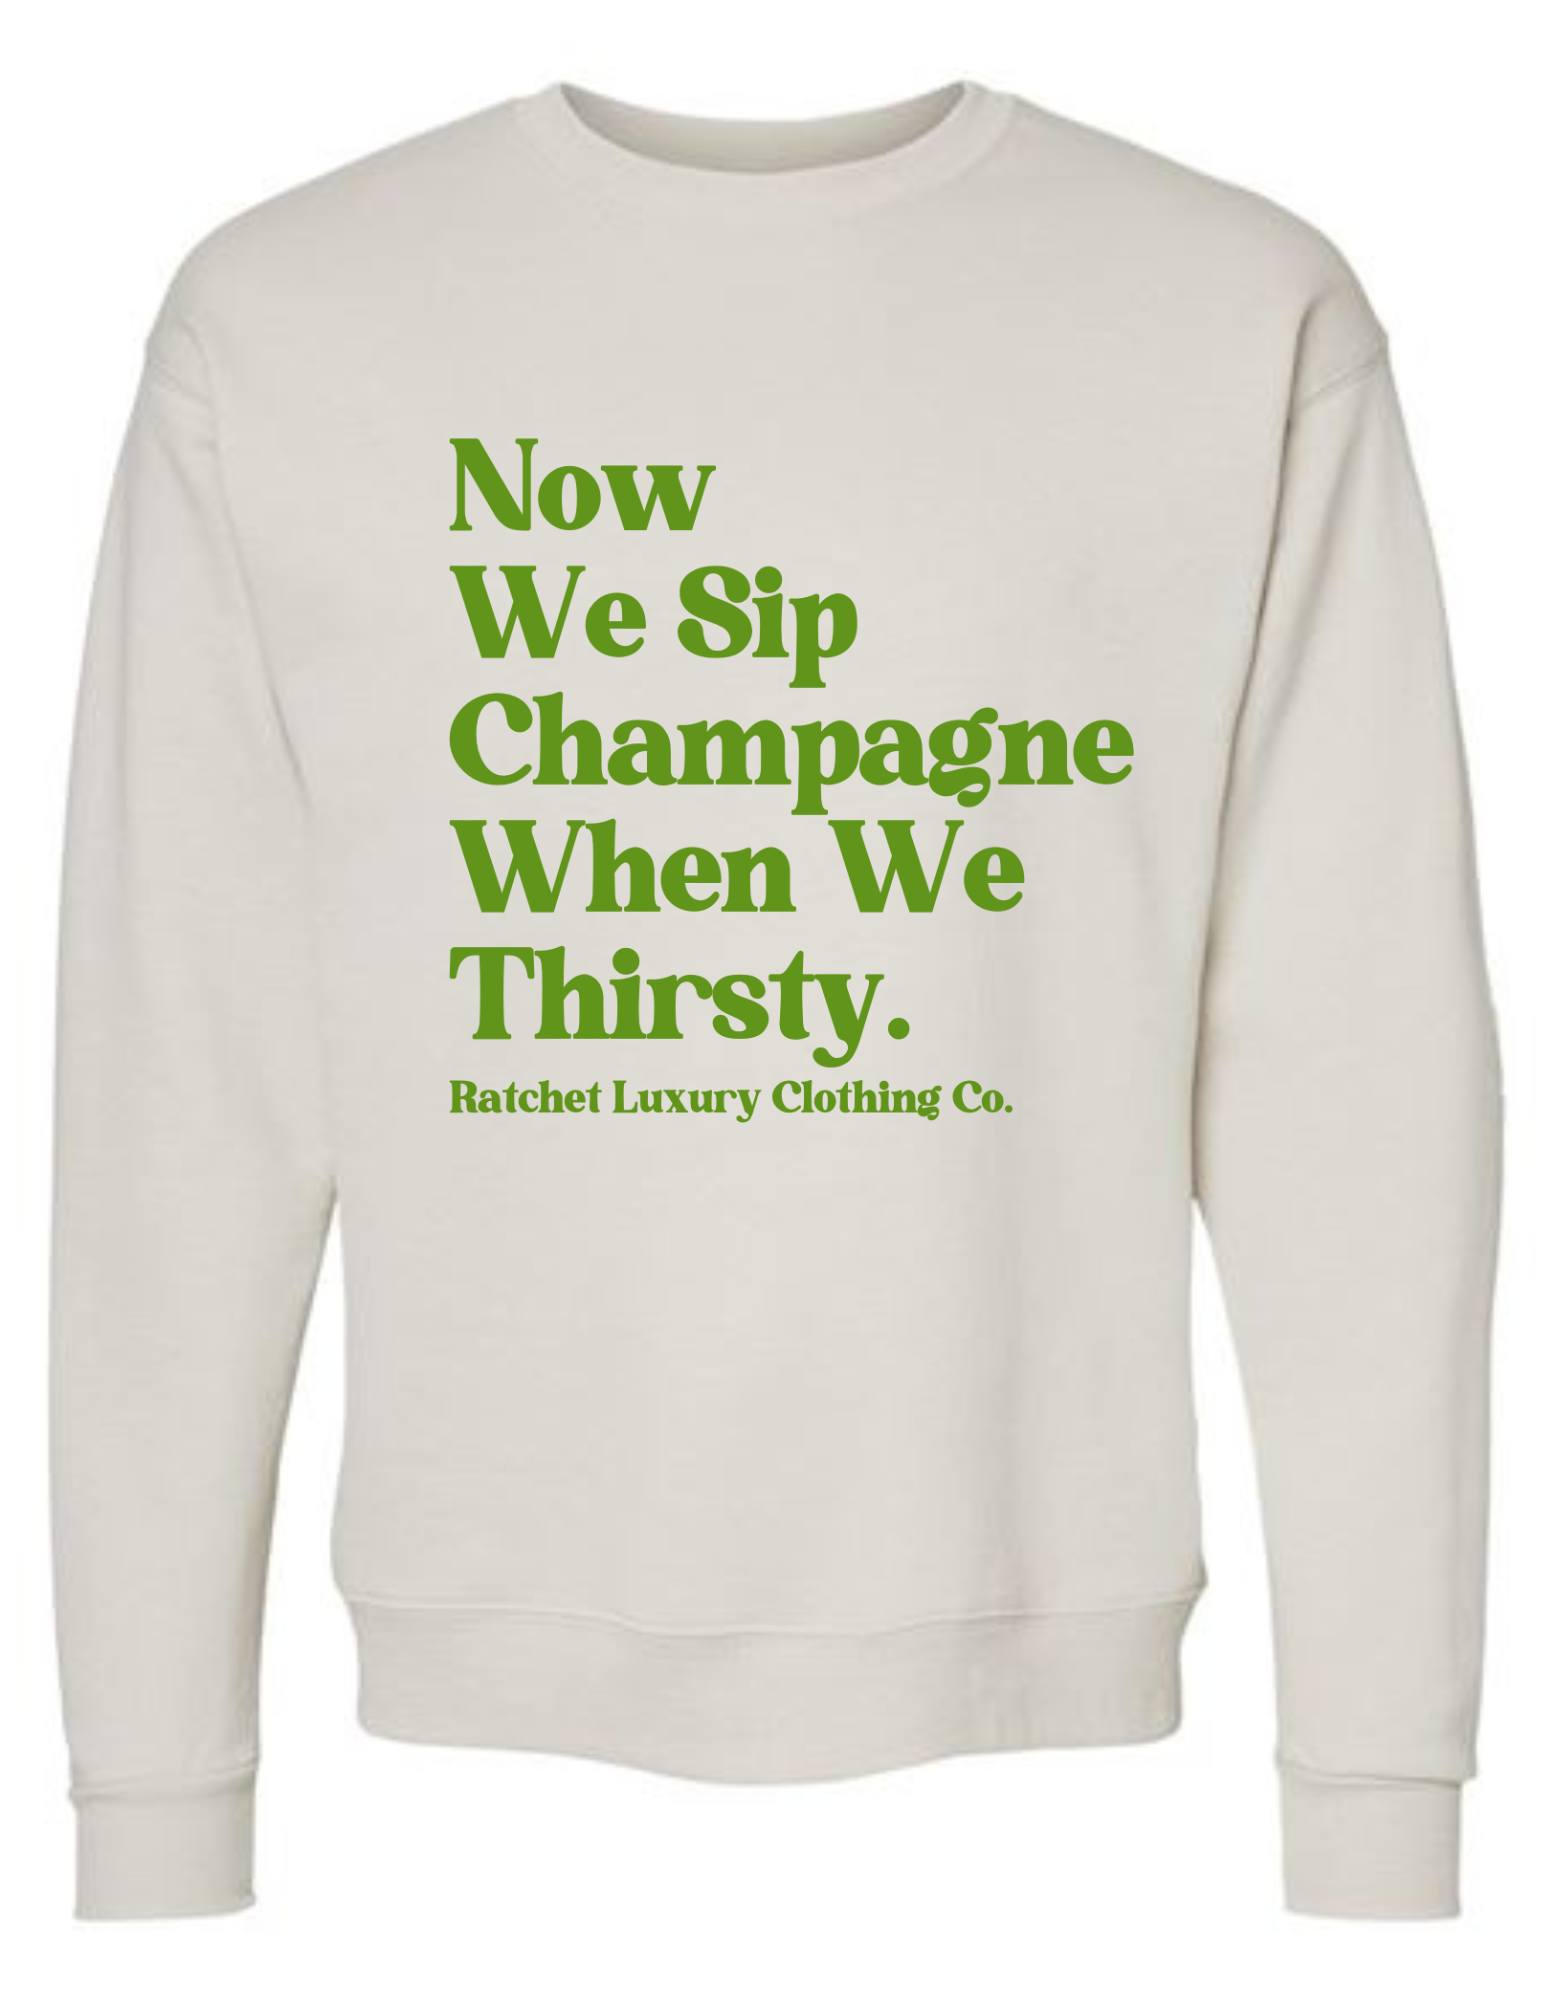 Stay Stylish With The 'Now We Sip Champagne When We Thirsty' Sweatshirt